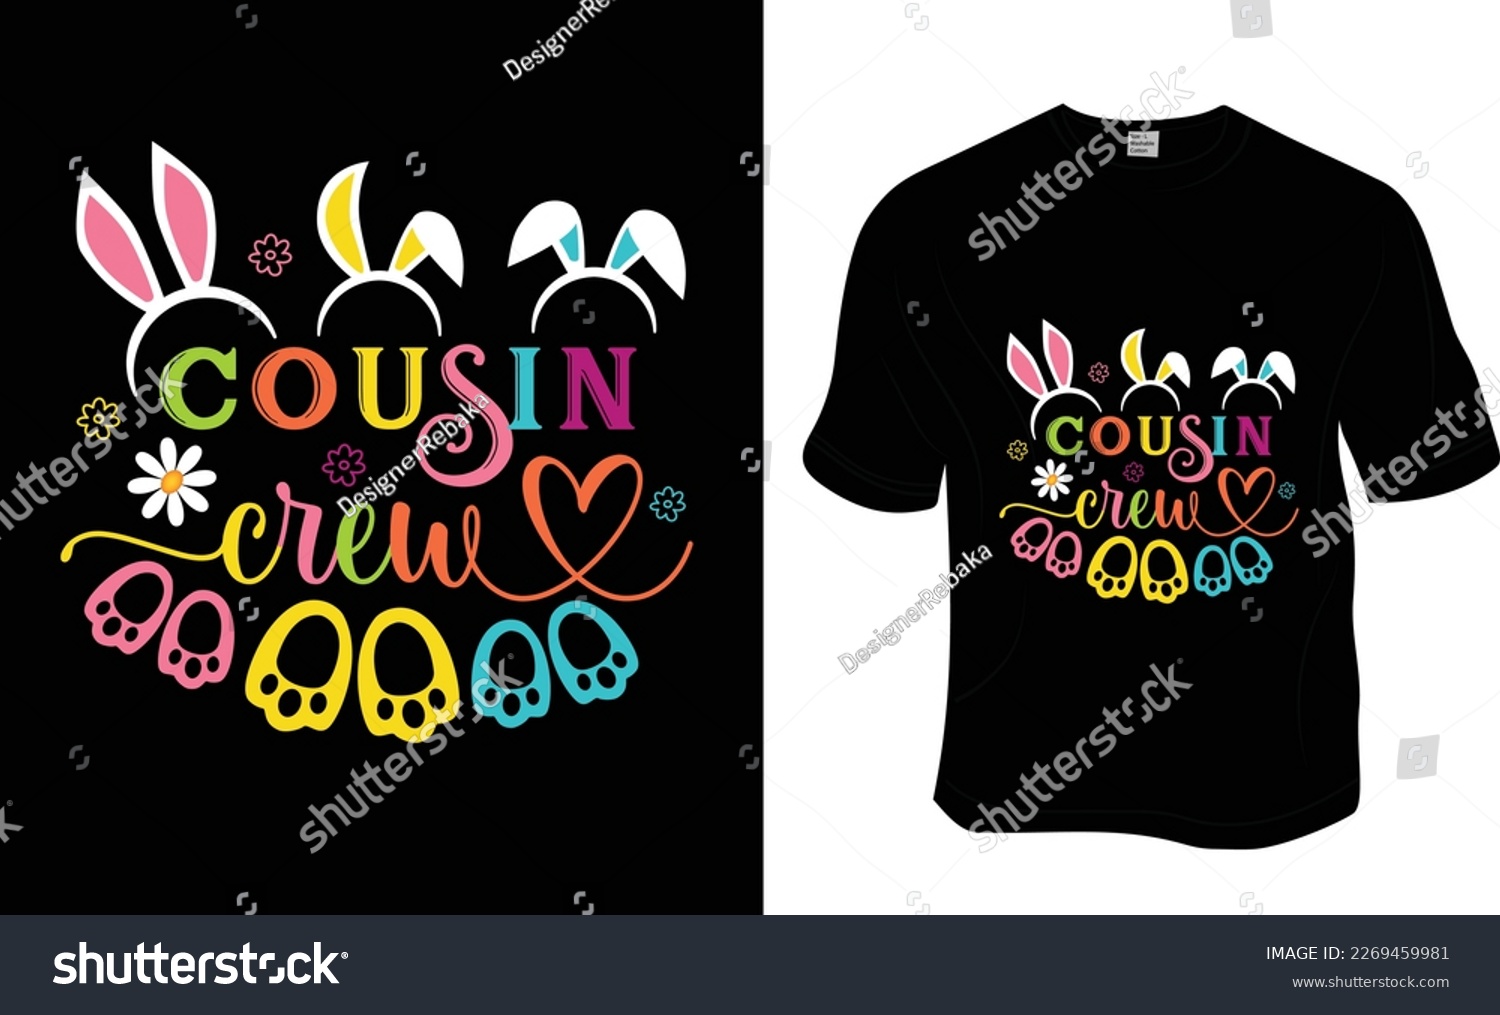 SVG of Cousin Crew, SVG, Sunday, Easter T-Shirt Design.  Ready to print for apparel, poster, and illustration. Modern, simple, lettering.

 svg